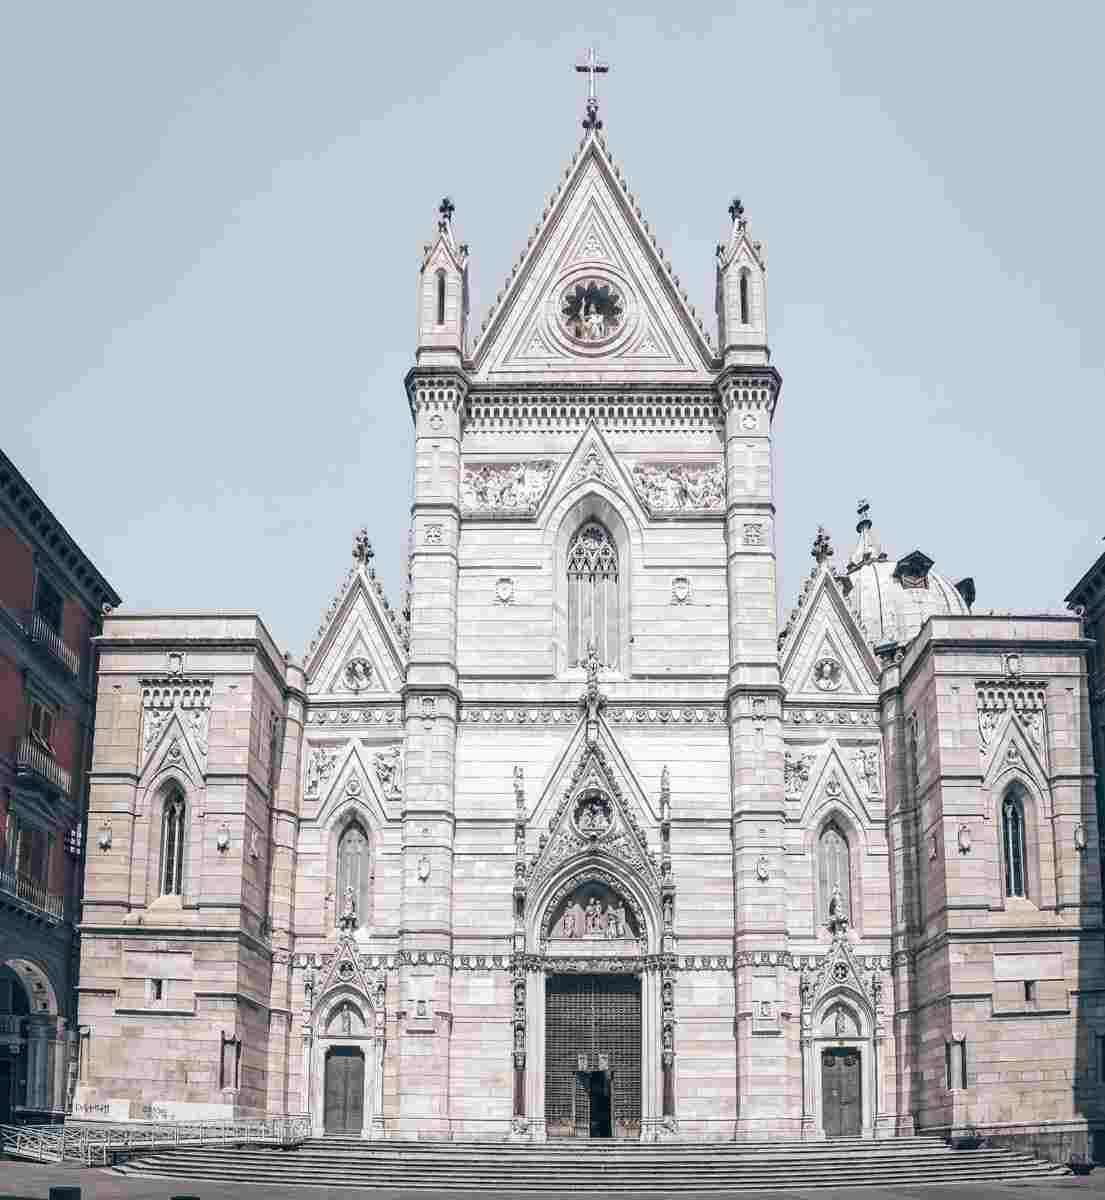 Must-see Naples: The Neo-Gothic facade of the Naples Cathedral